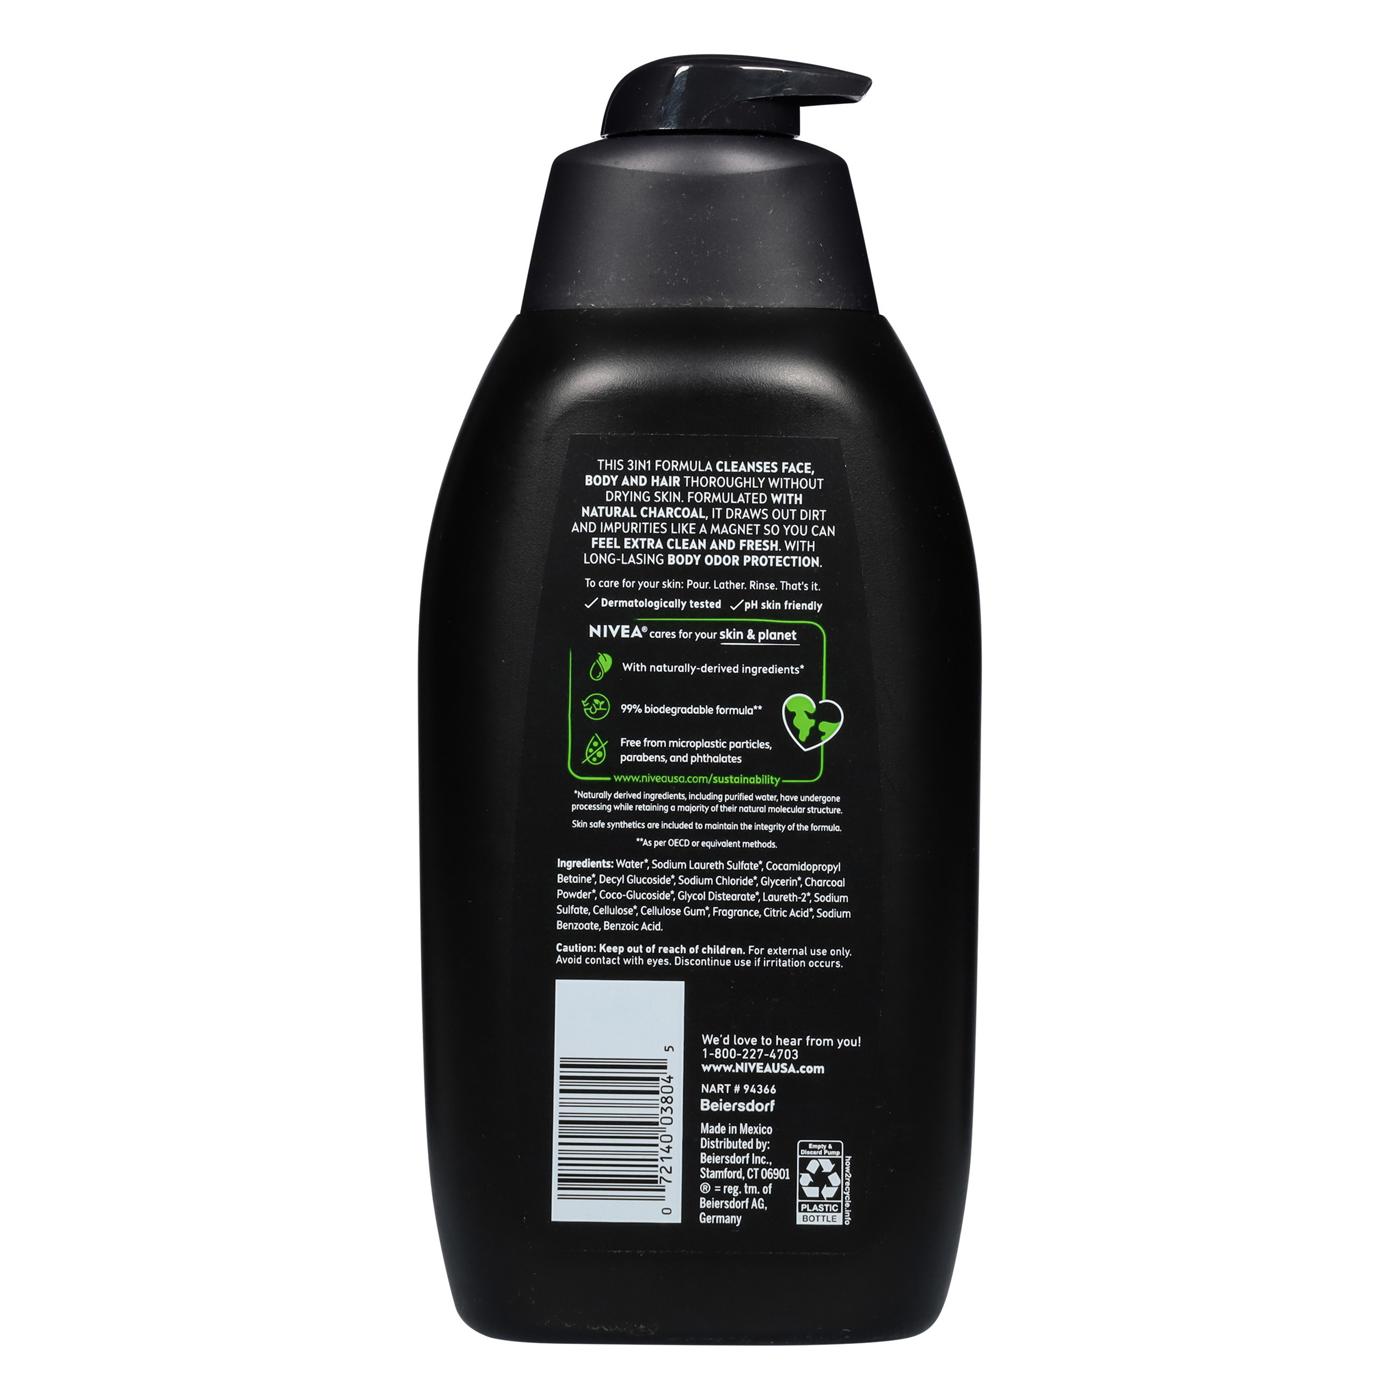 NIVEA Men Active Clean 3- in-1 Body Wash - Deep Clean with Natural Charcoal ; image 2 of 2